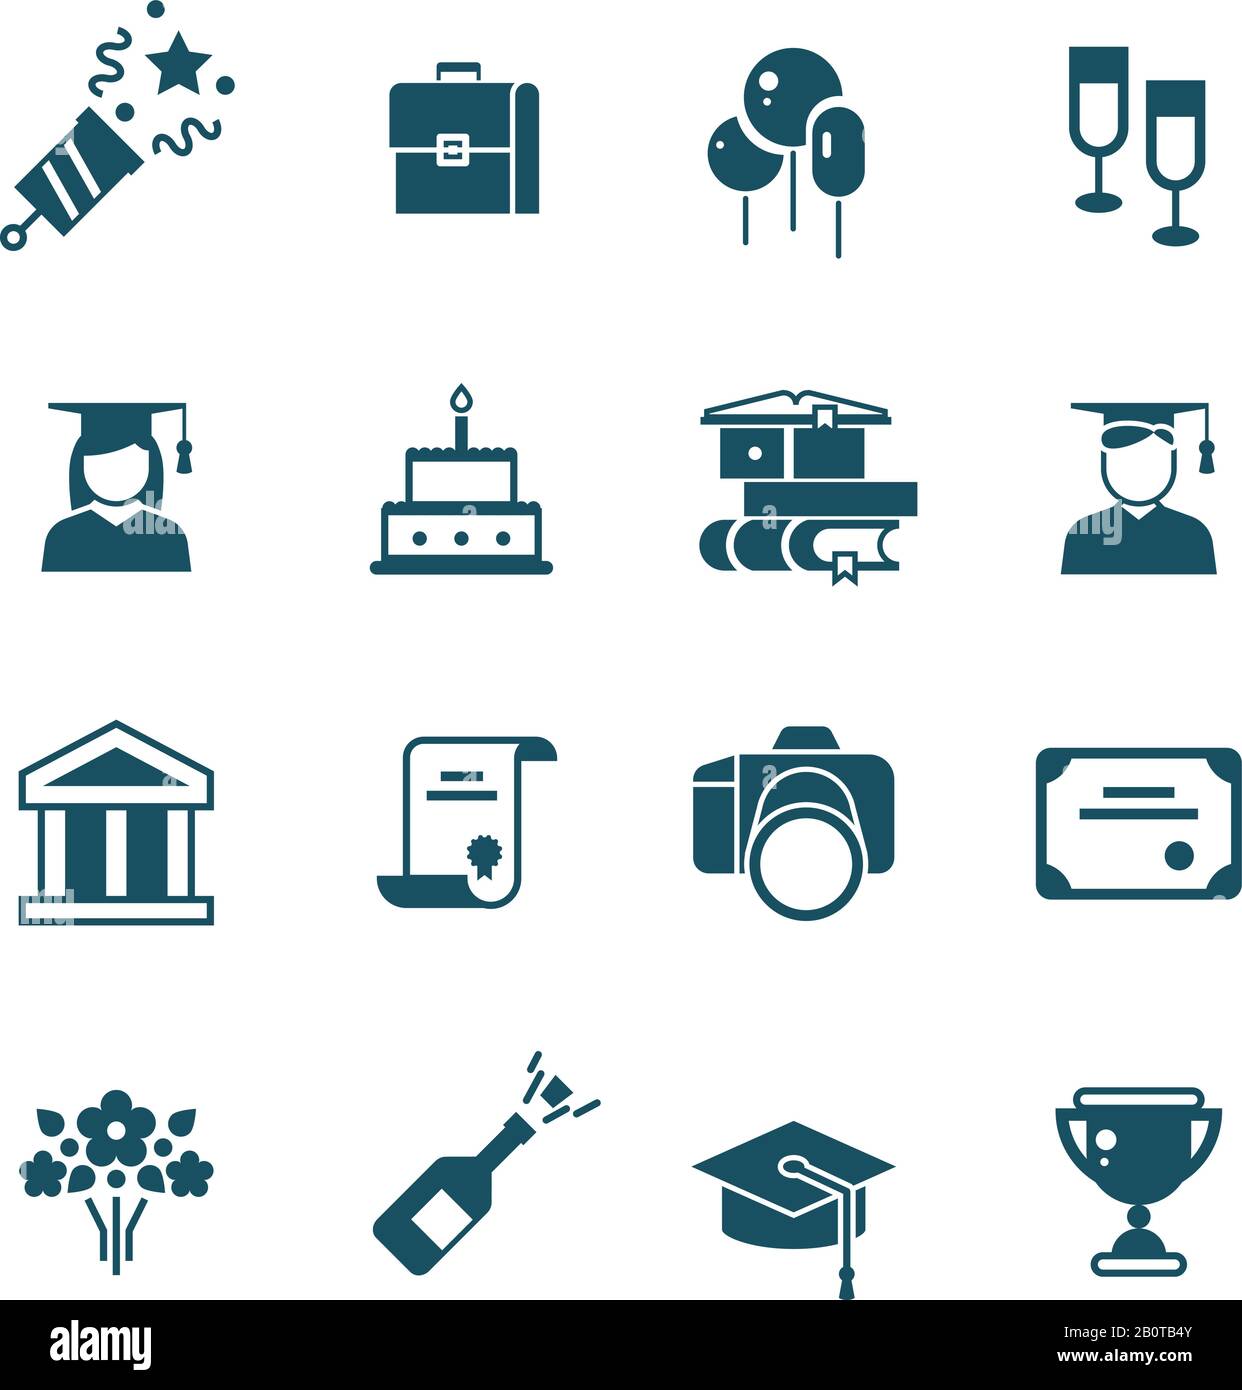 Student achievement and high school graduation vector icons. Graduate bachelor and master, illustration of graduation students Stock Vector